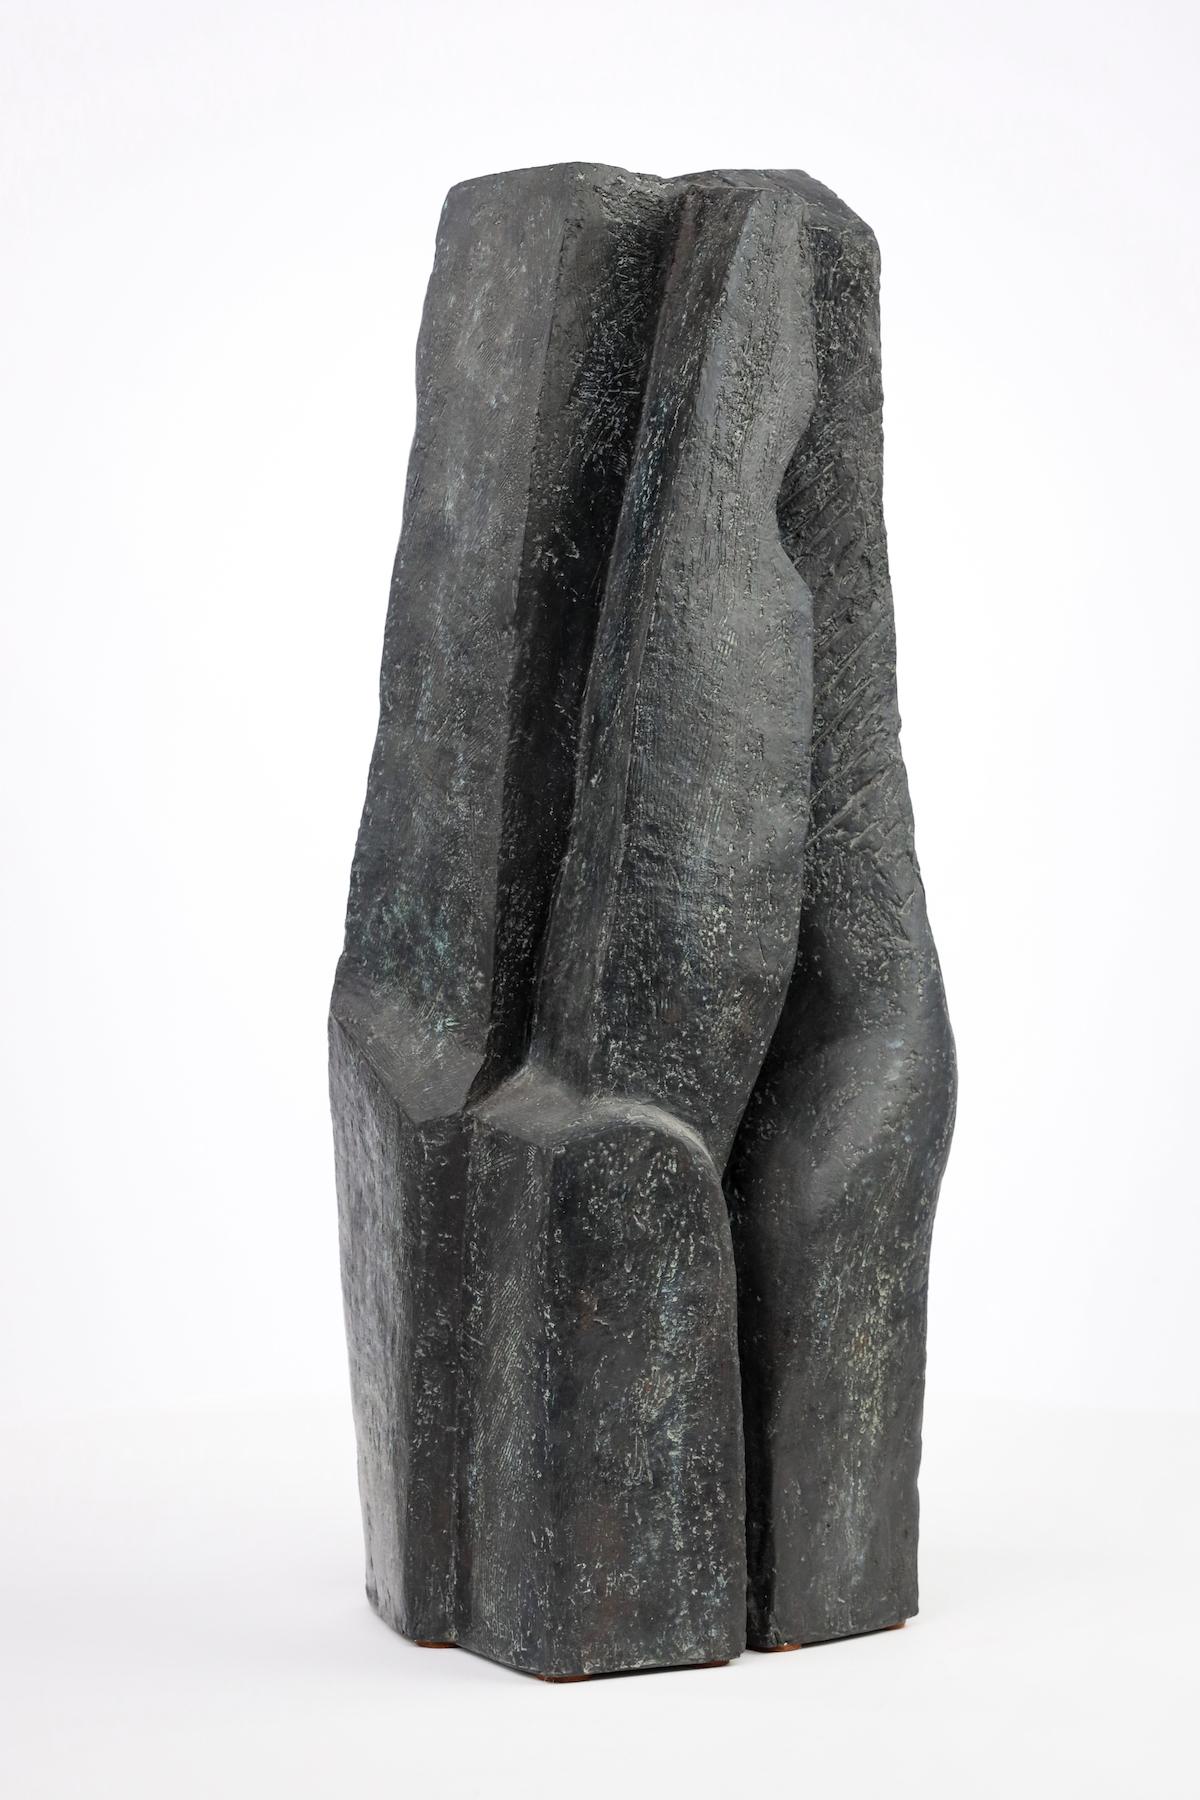 Duo by Martine Demal - Contemporary bronze sculpture, semi abstract 3